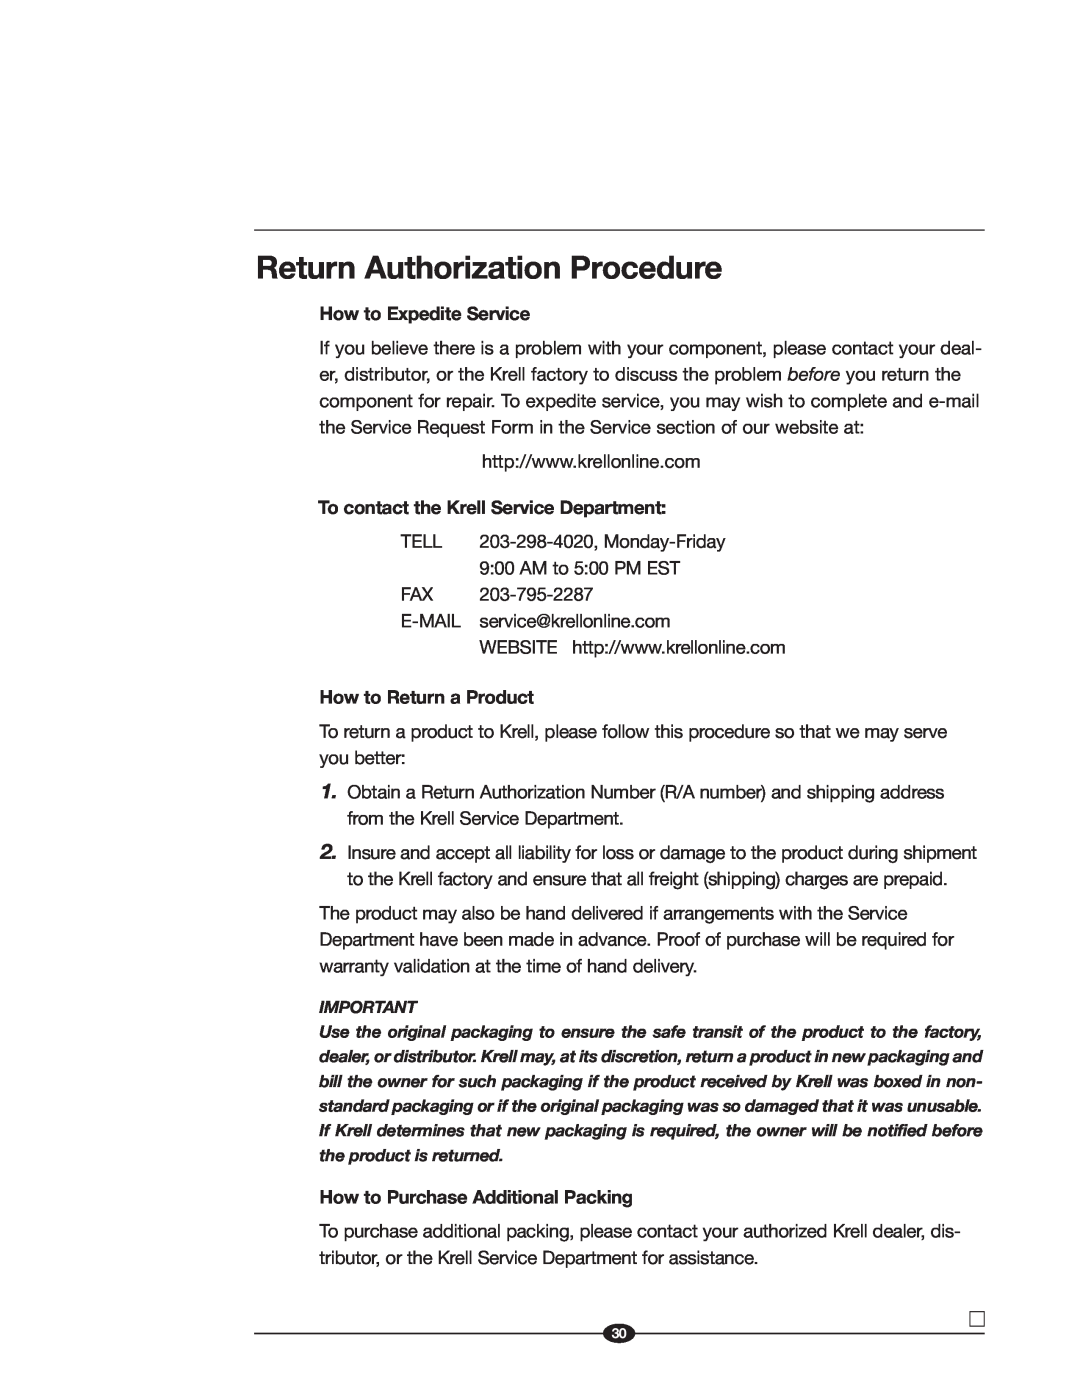 Krell Industries Evolution 600, 900, 400 Return Authorization Procedure, How to Expedite Service, How to Return a Product 